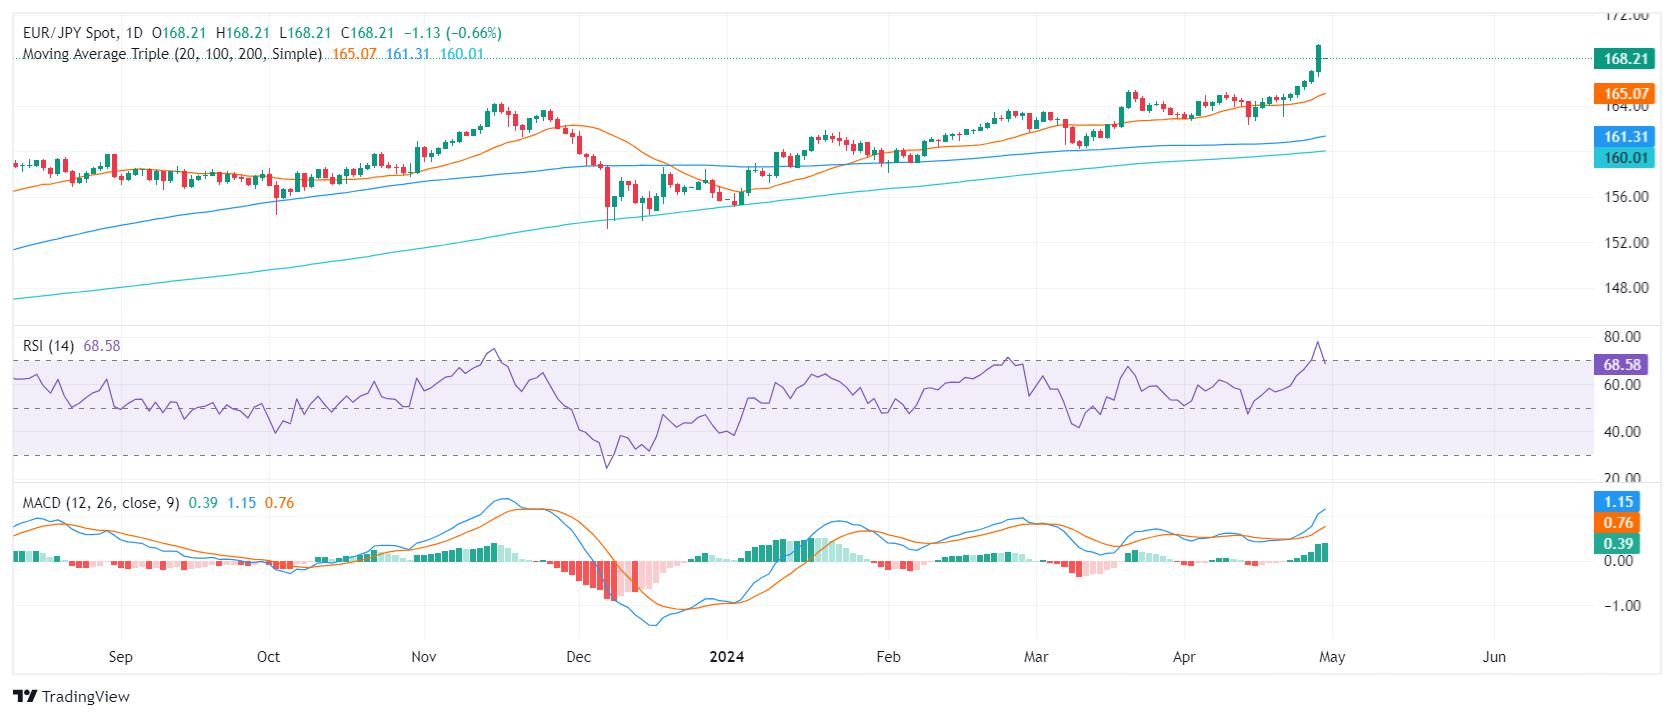 EUR/JPY Price Analysis: Bulls maintain control, bears are not done yet and appear to gear up